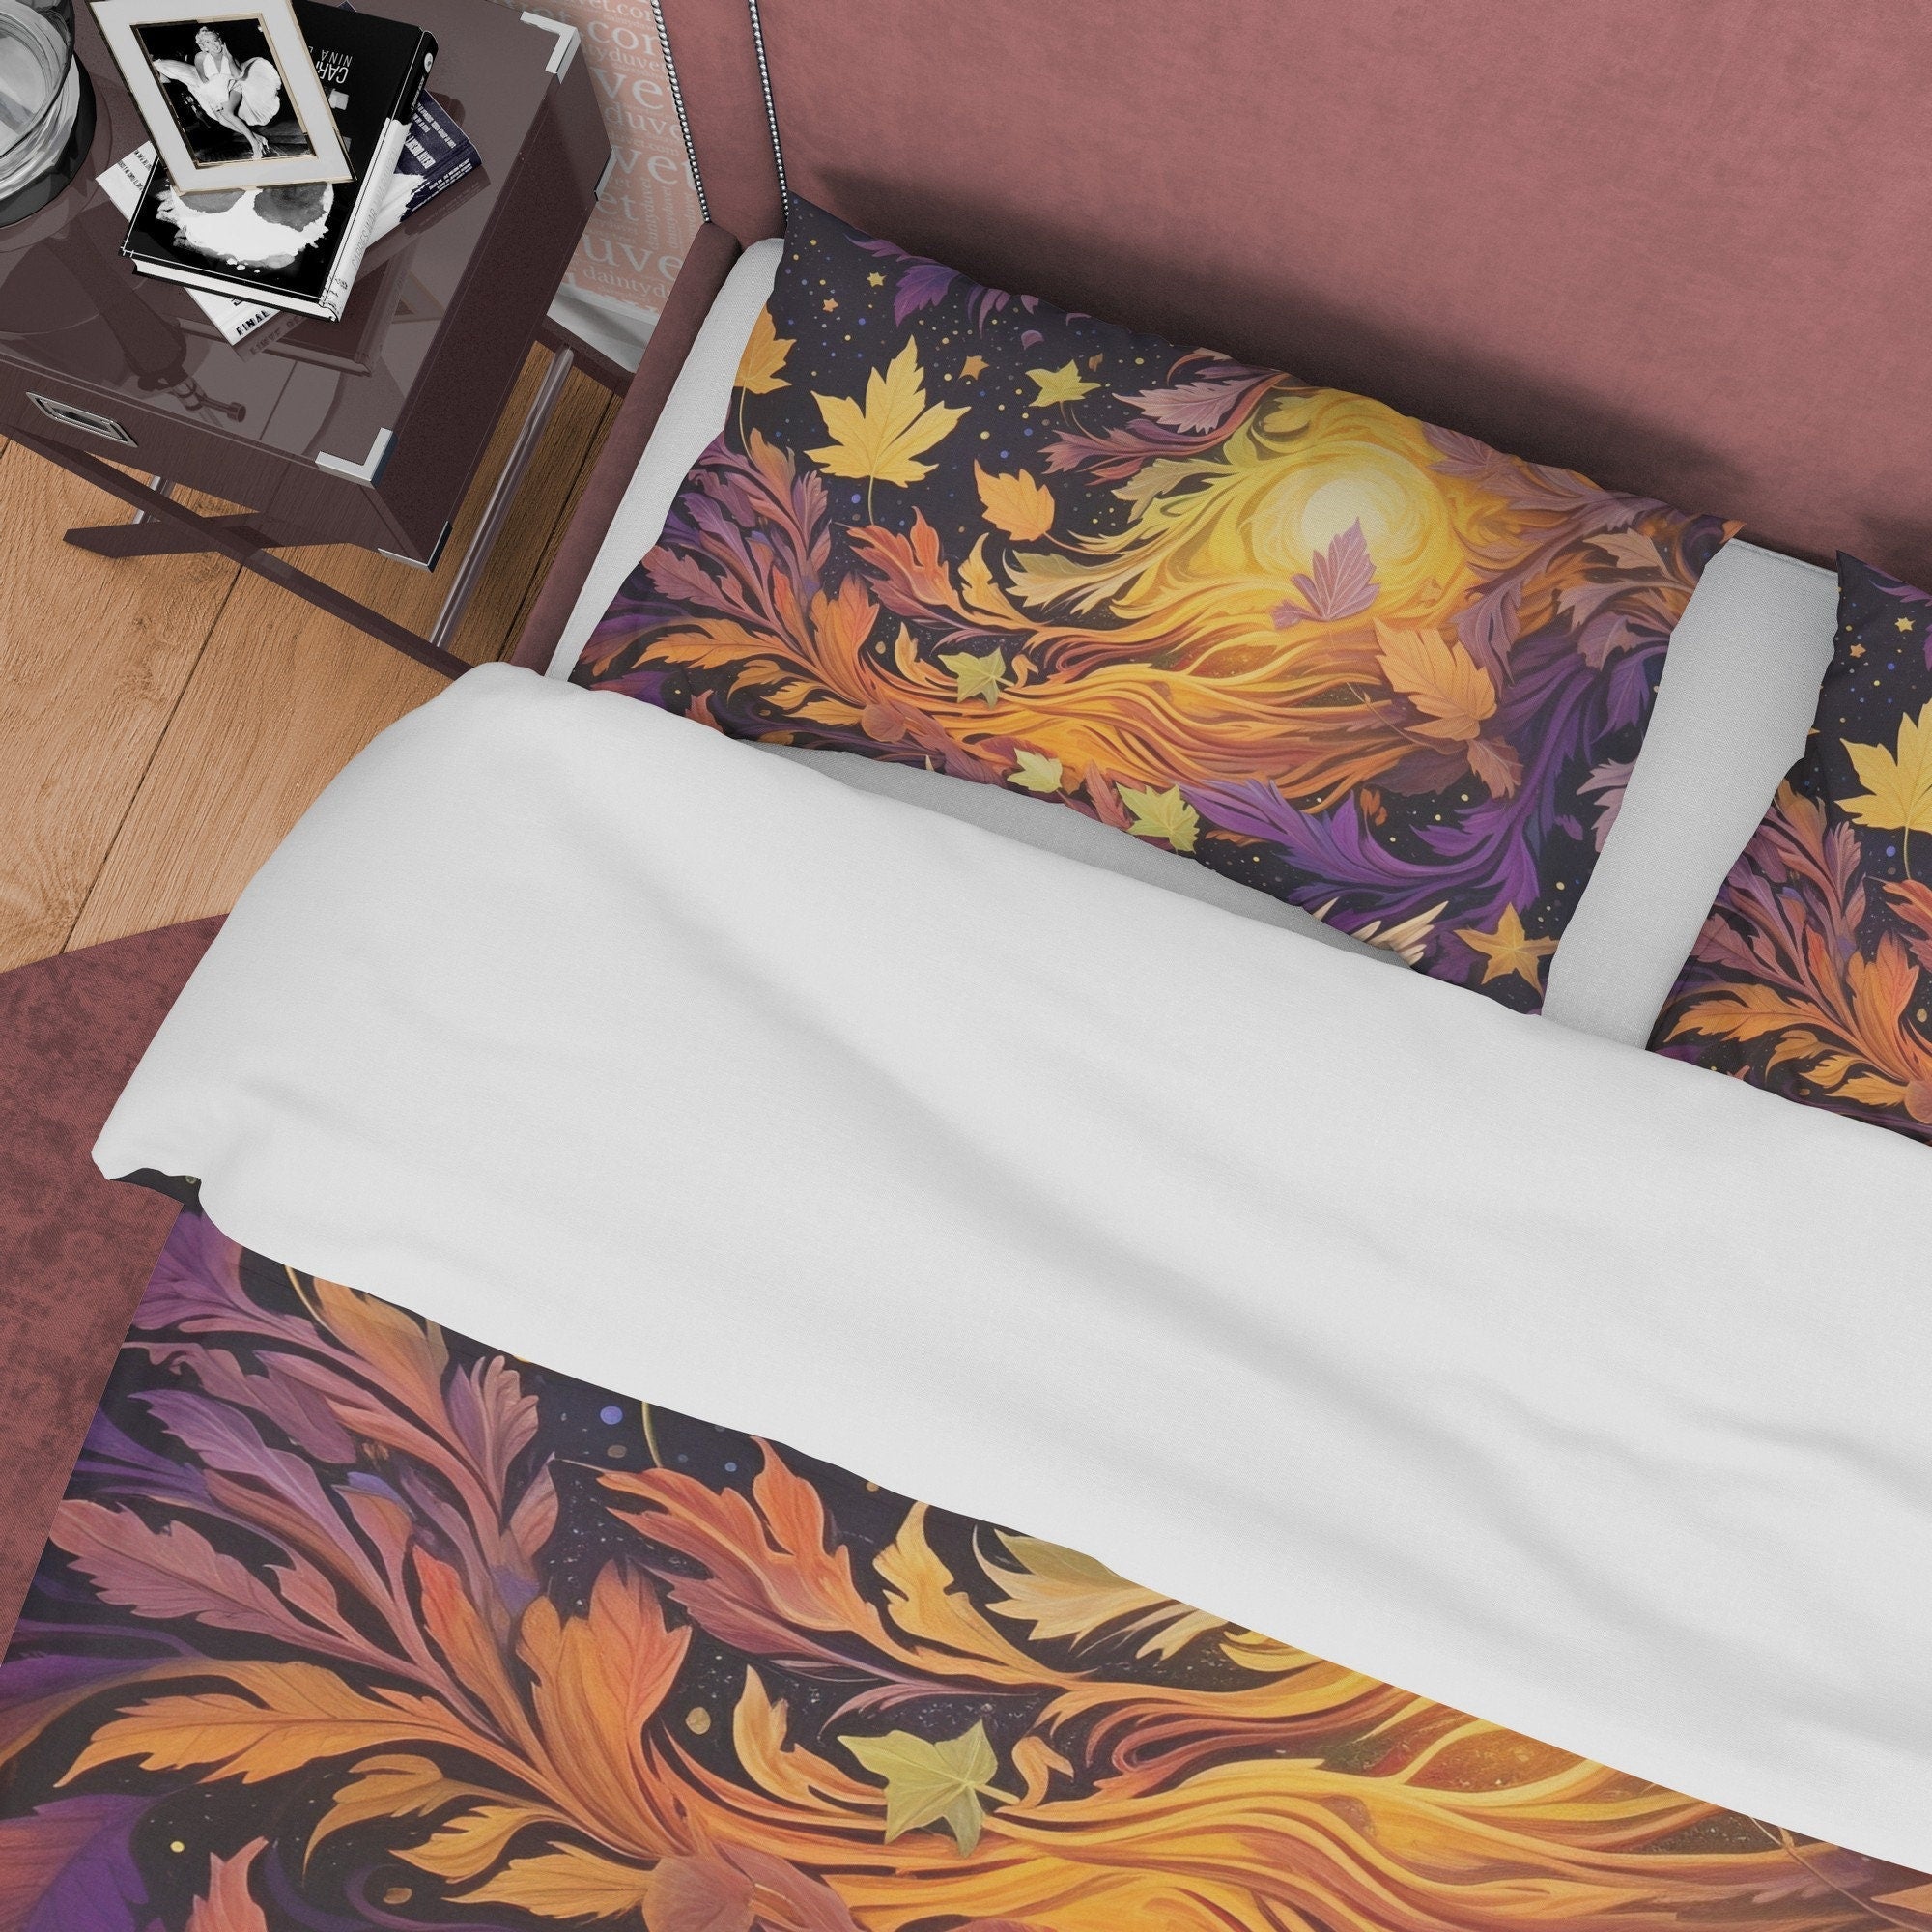 Rustic Duvet Cover Purple with Flying Bird, Autumn Bedding Set, Warm Autumn Colors Printed Quilt Cover, Foliage Bedspread